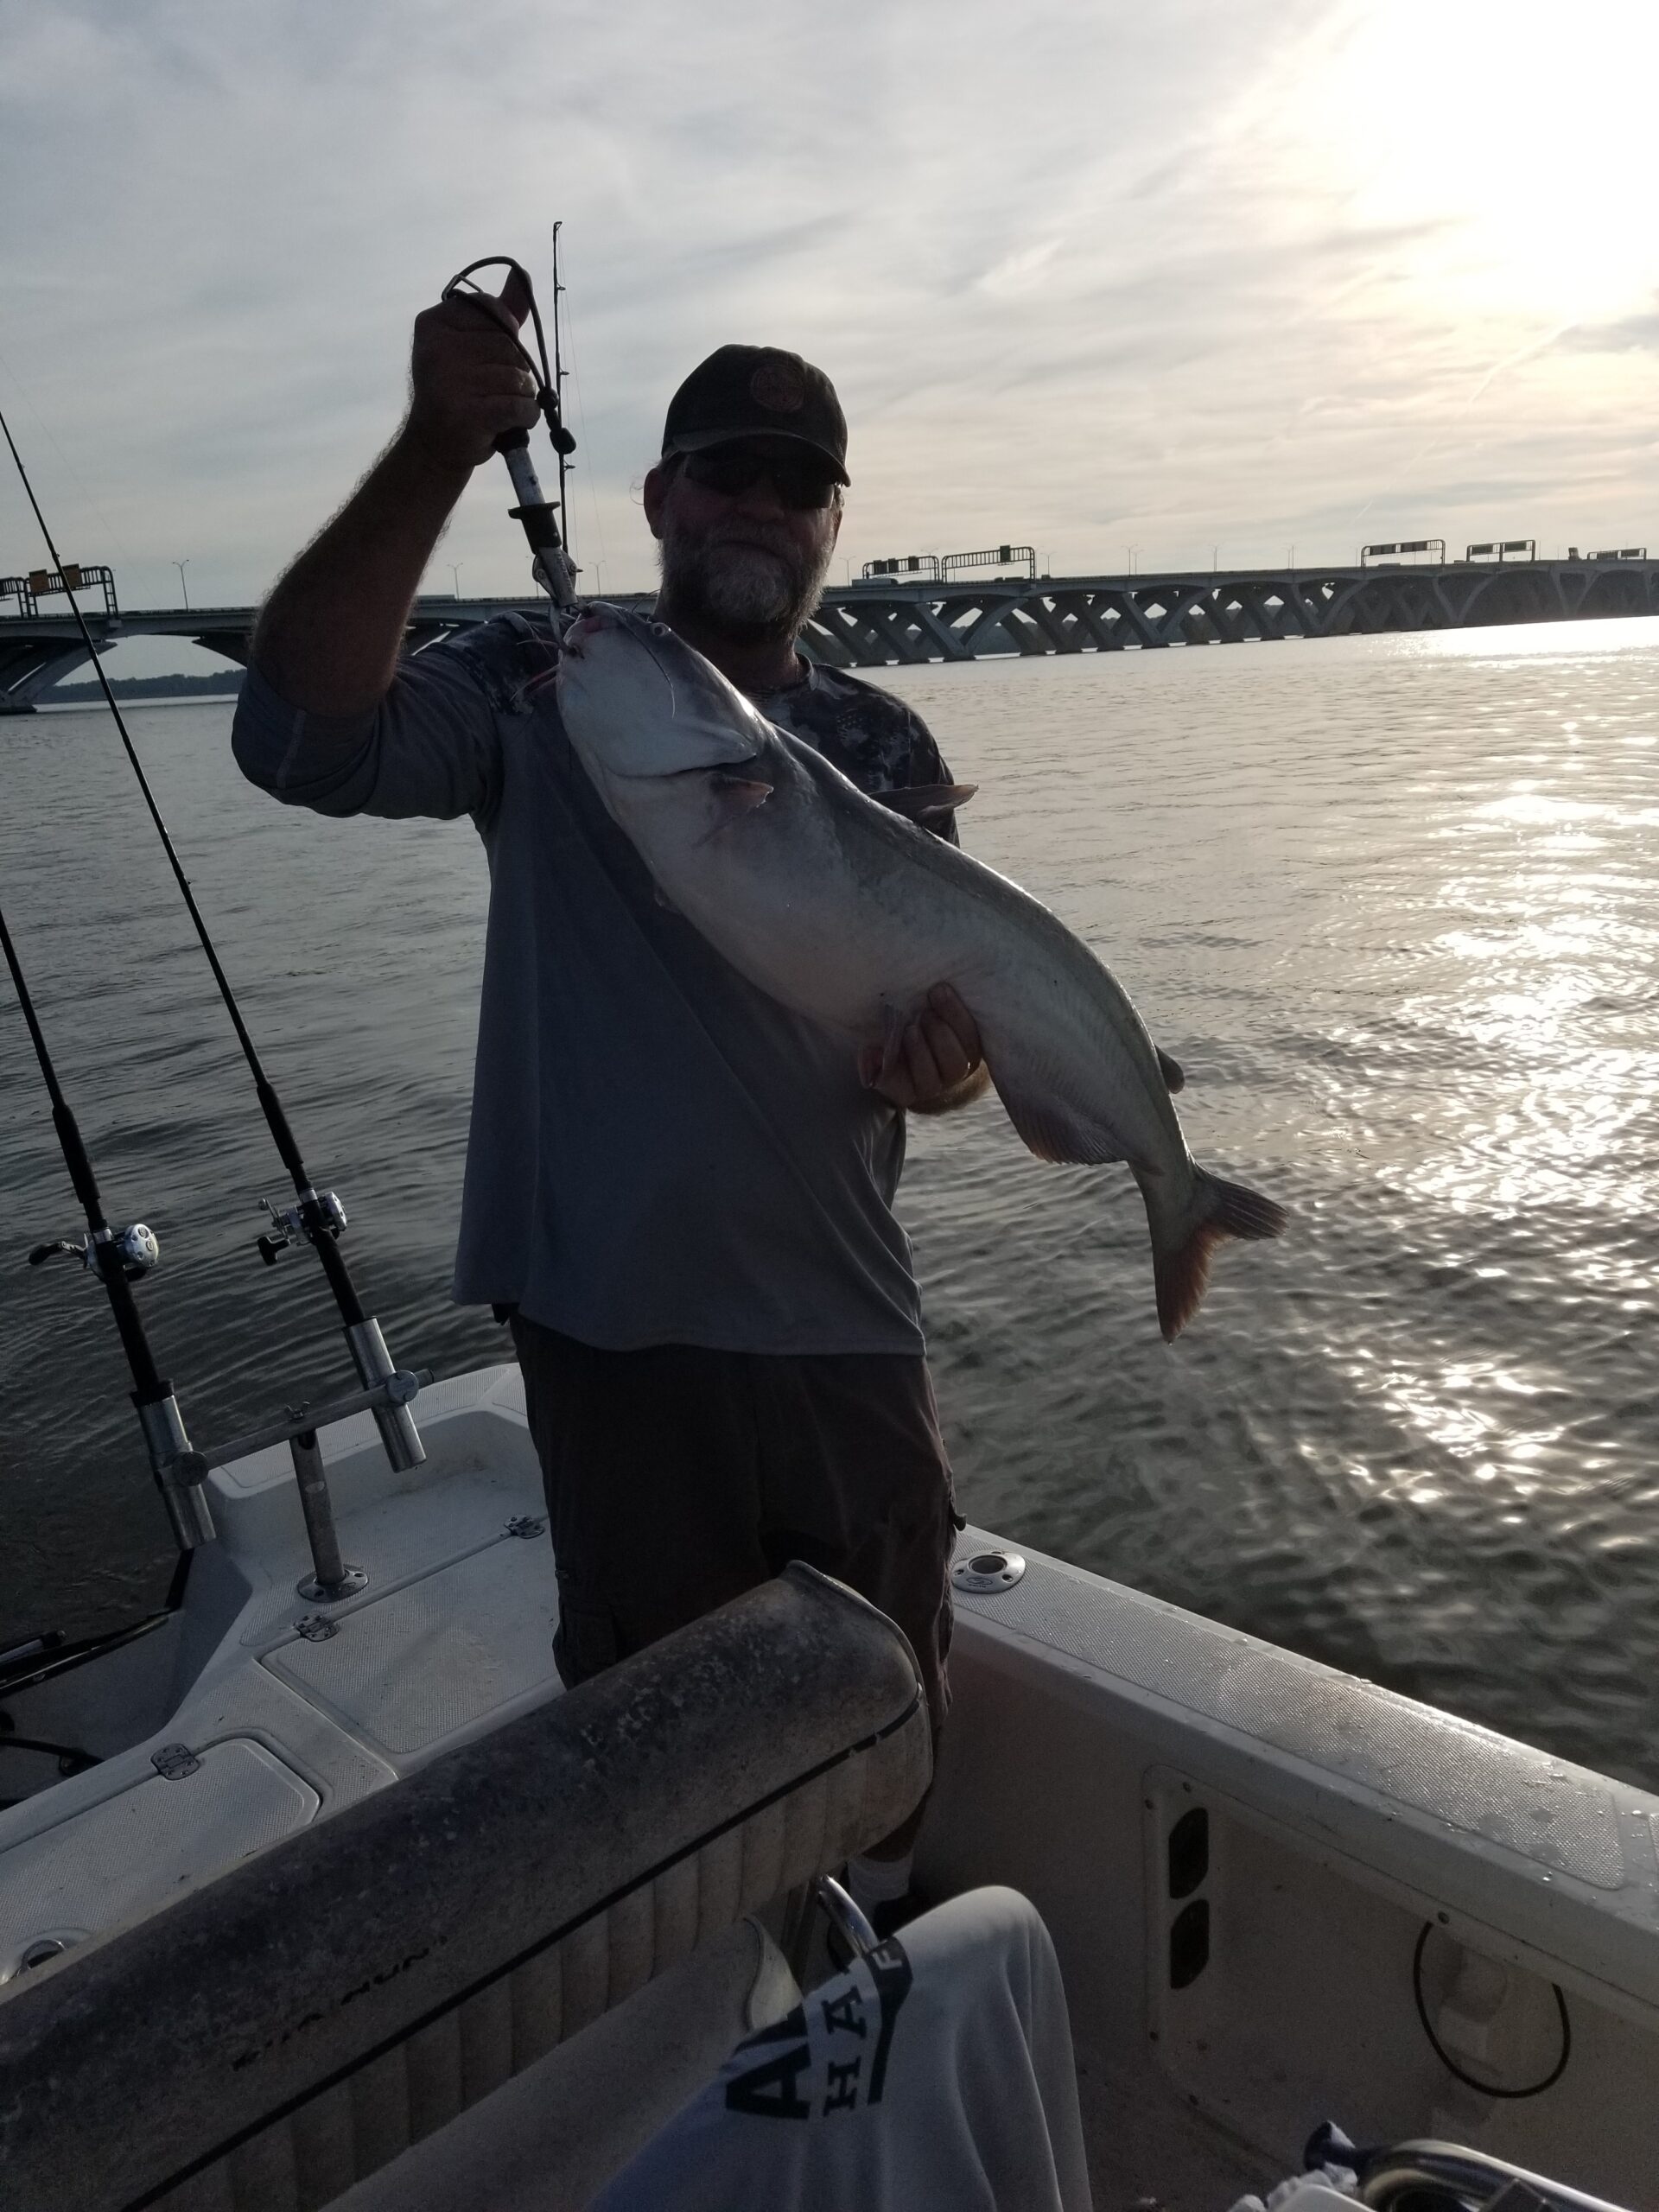 https://indianheadcharters.com/wp-content/uploads/2021/11/10-14-21-3-scaled.jpg